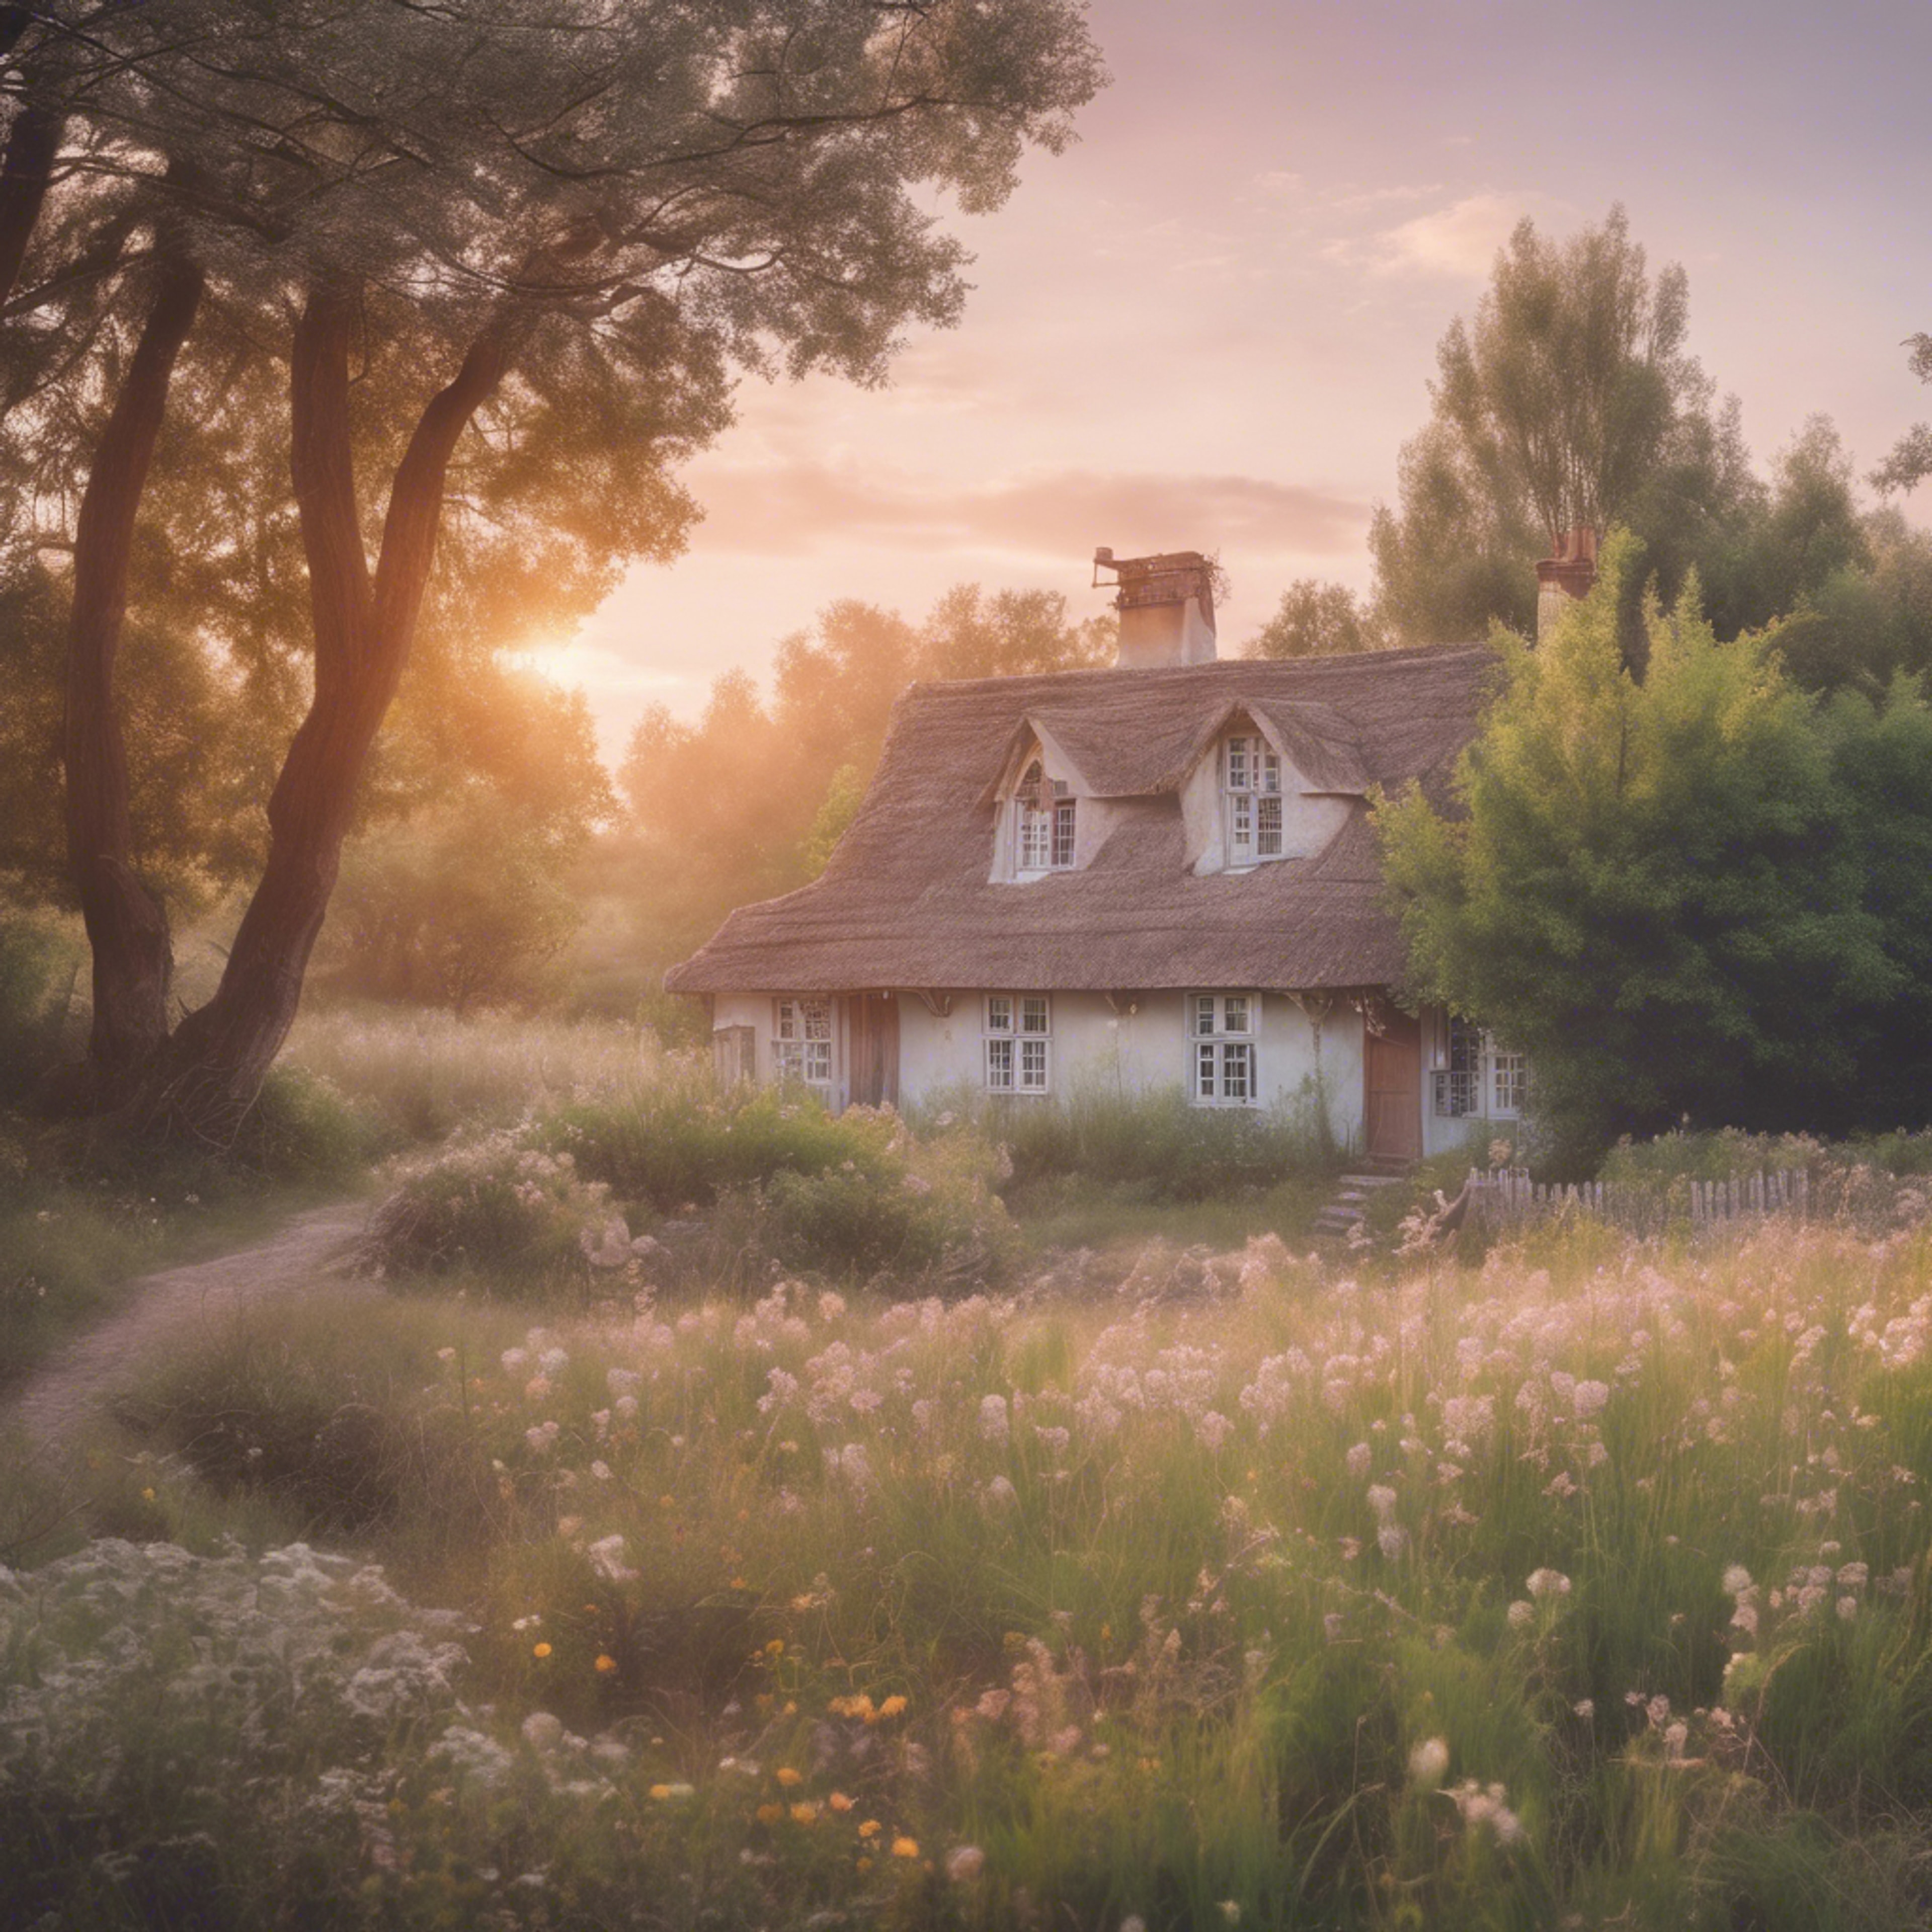 A soft pastel sunrise over rustic cottages, birthing ethereal aesthetic beauty ورق الجدران[daea3b7a39e14a169eb1]